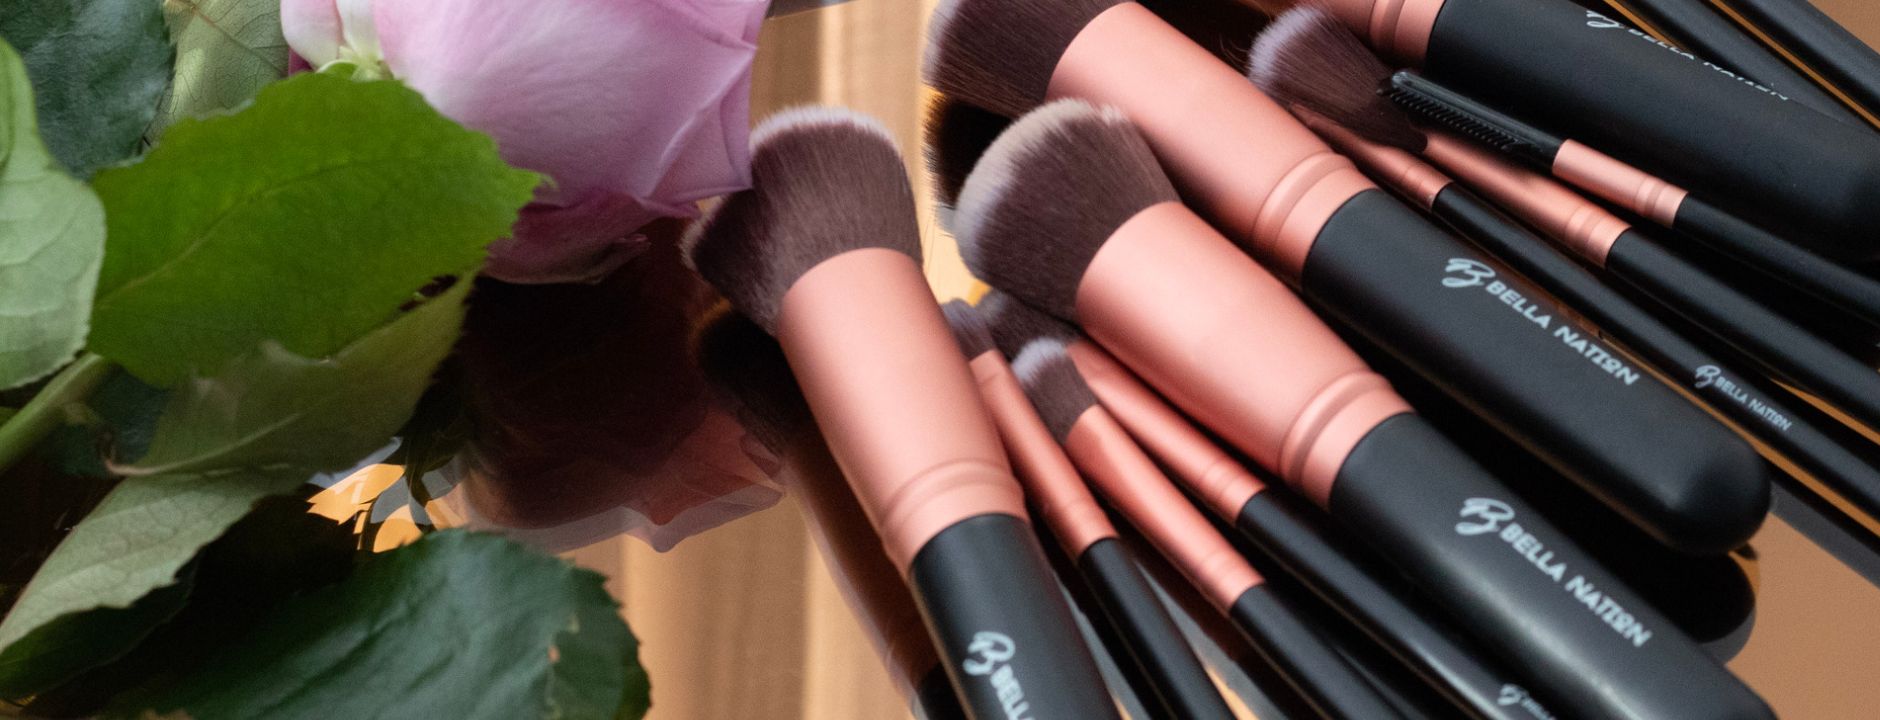 Ena Collection Makeup Brushes